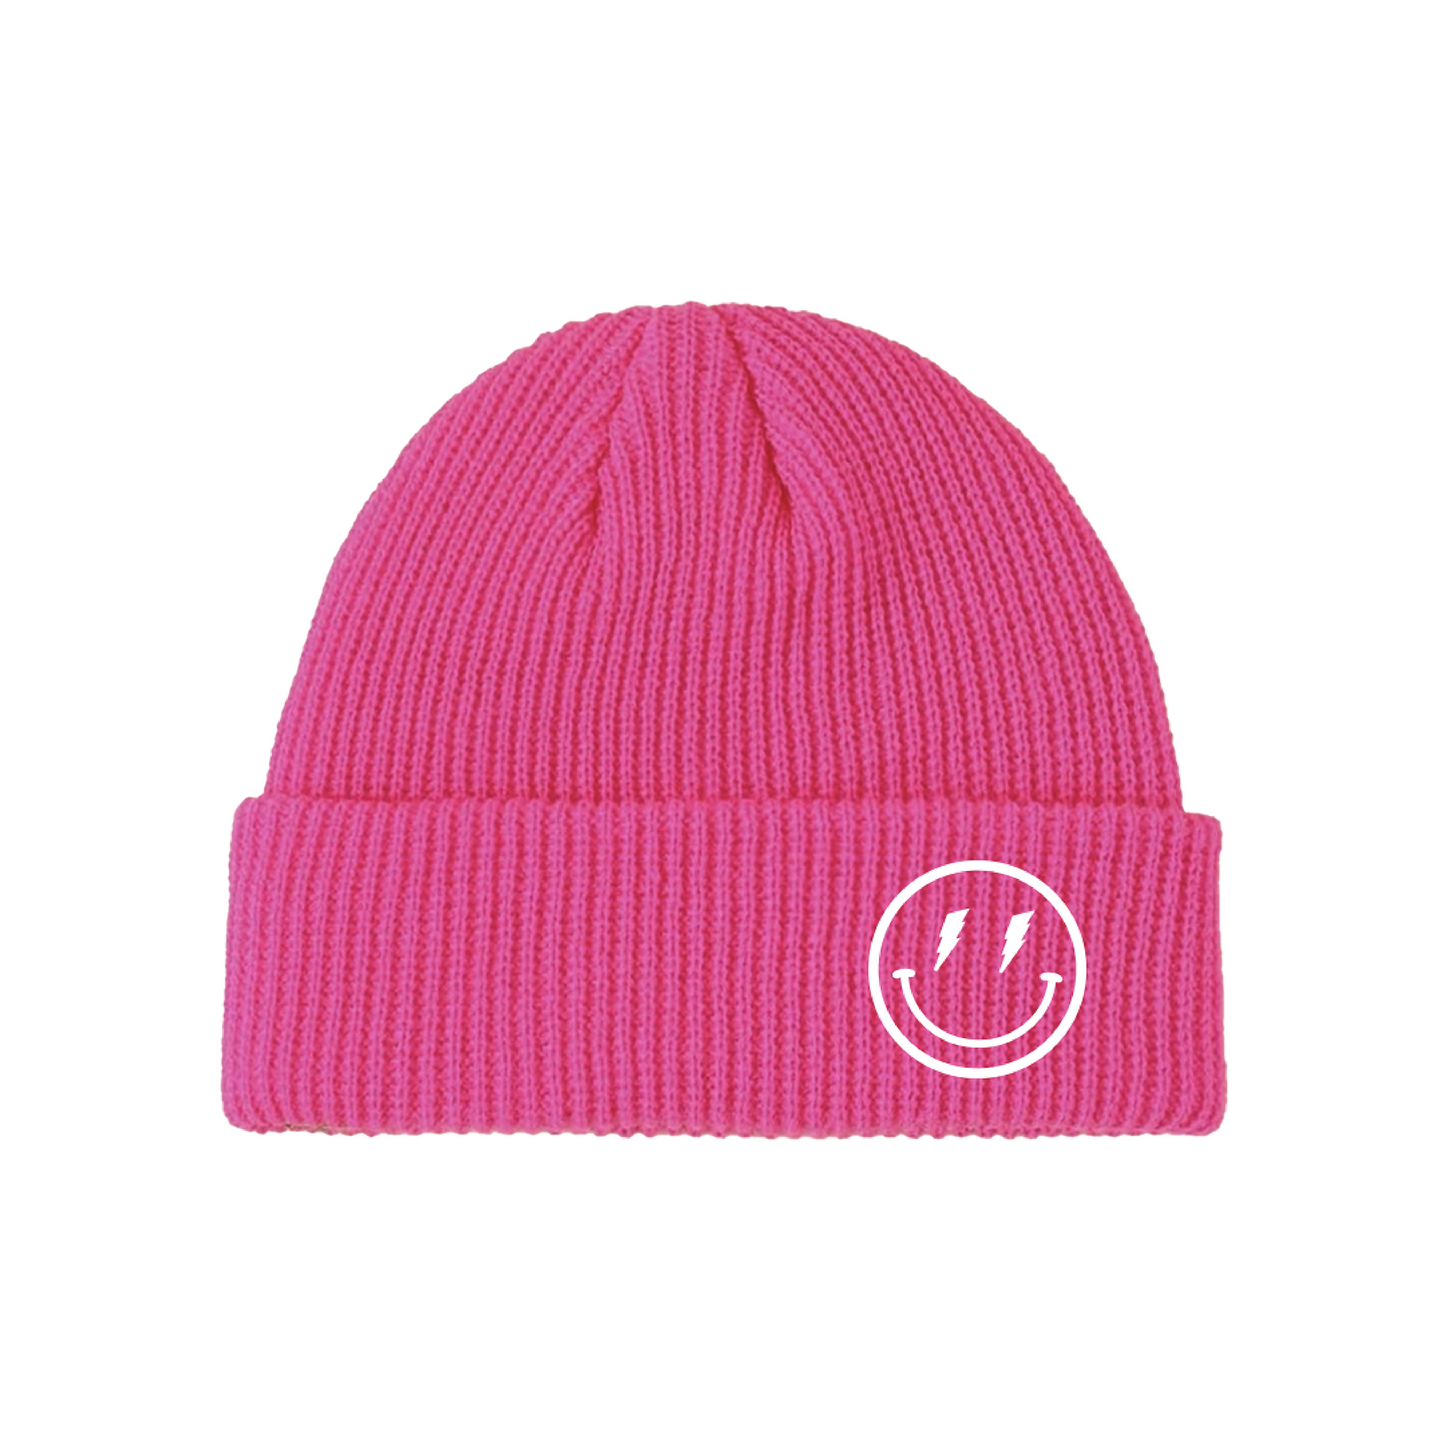 smiley beanie - pink